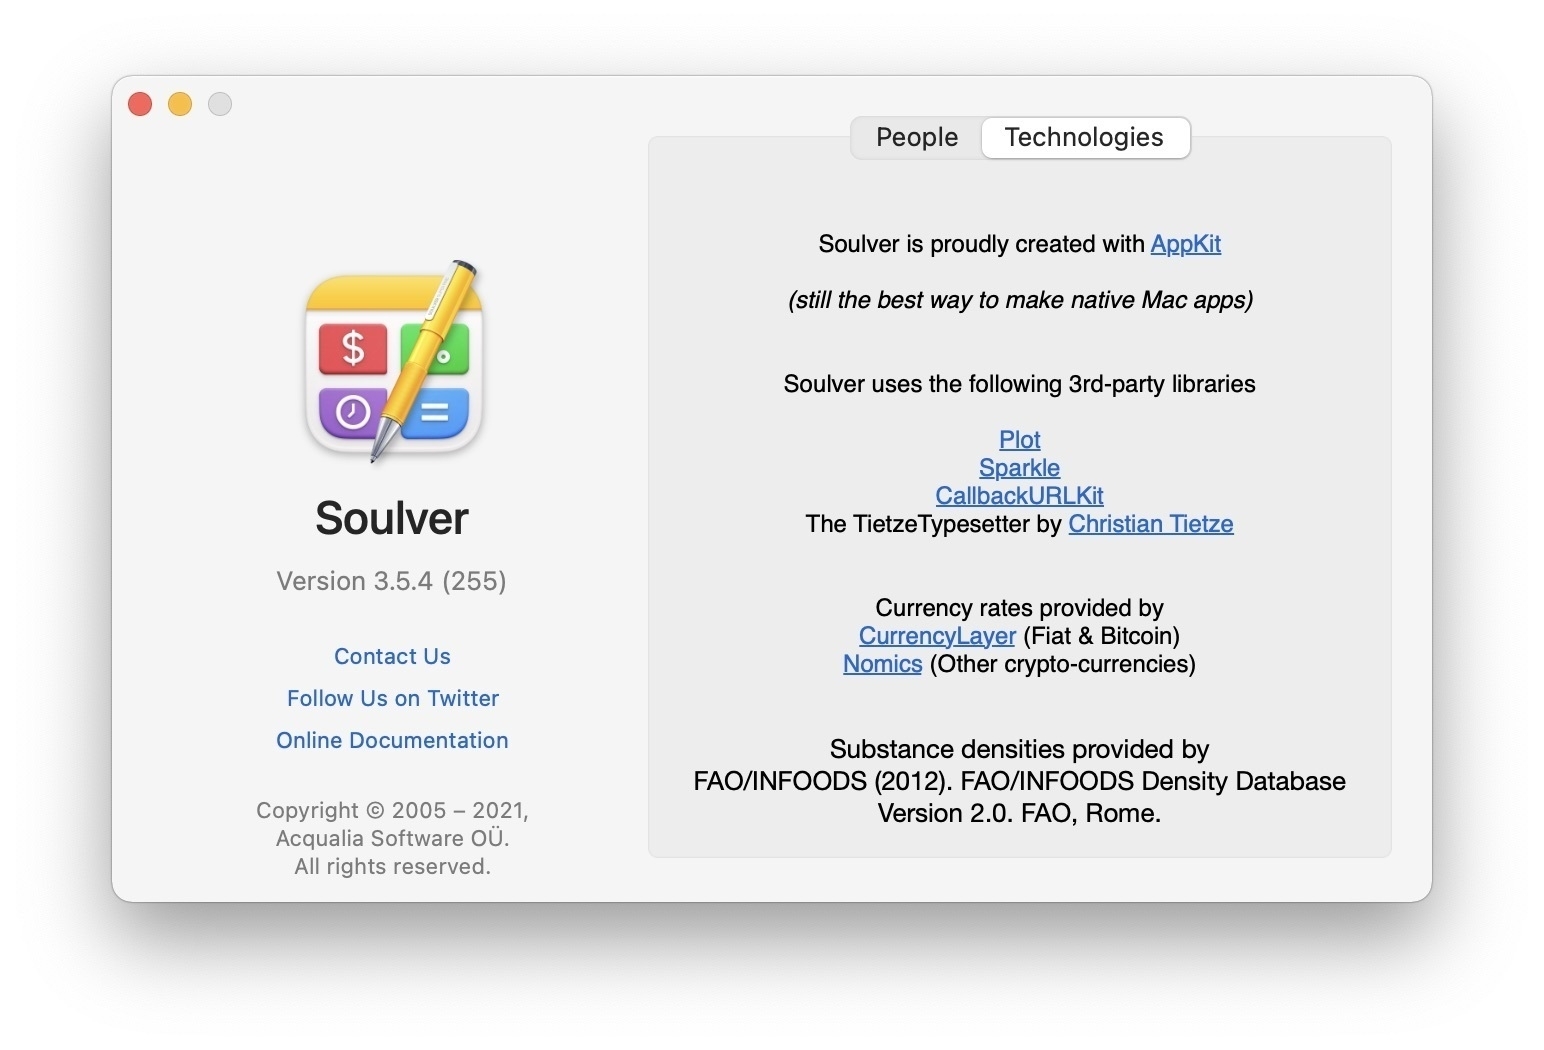 Screenshot of Mac about box for Soulver 3, including credit "Soulver is proudly created with AppKit (still the best way to make native Mac apps)".